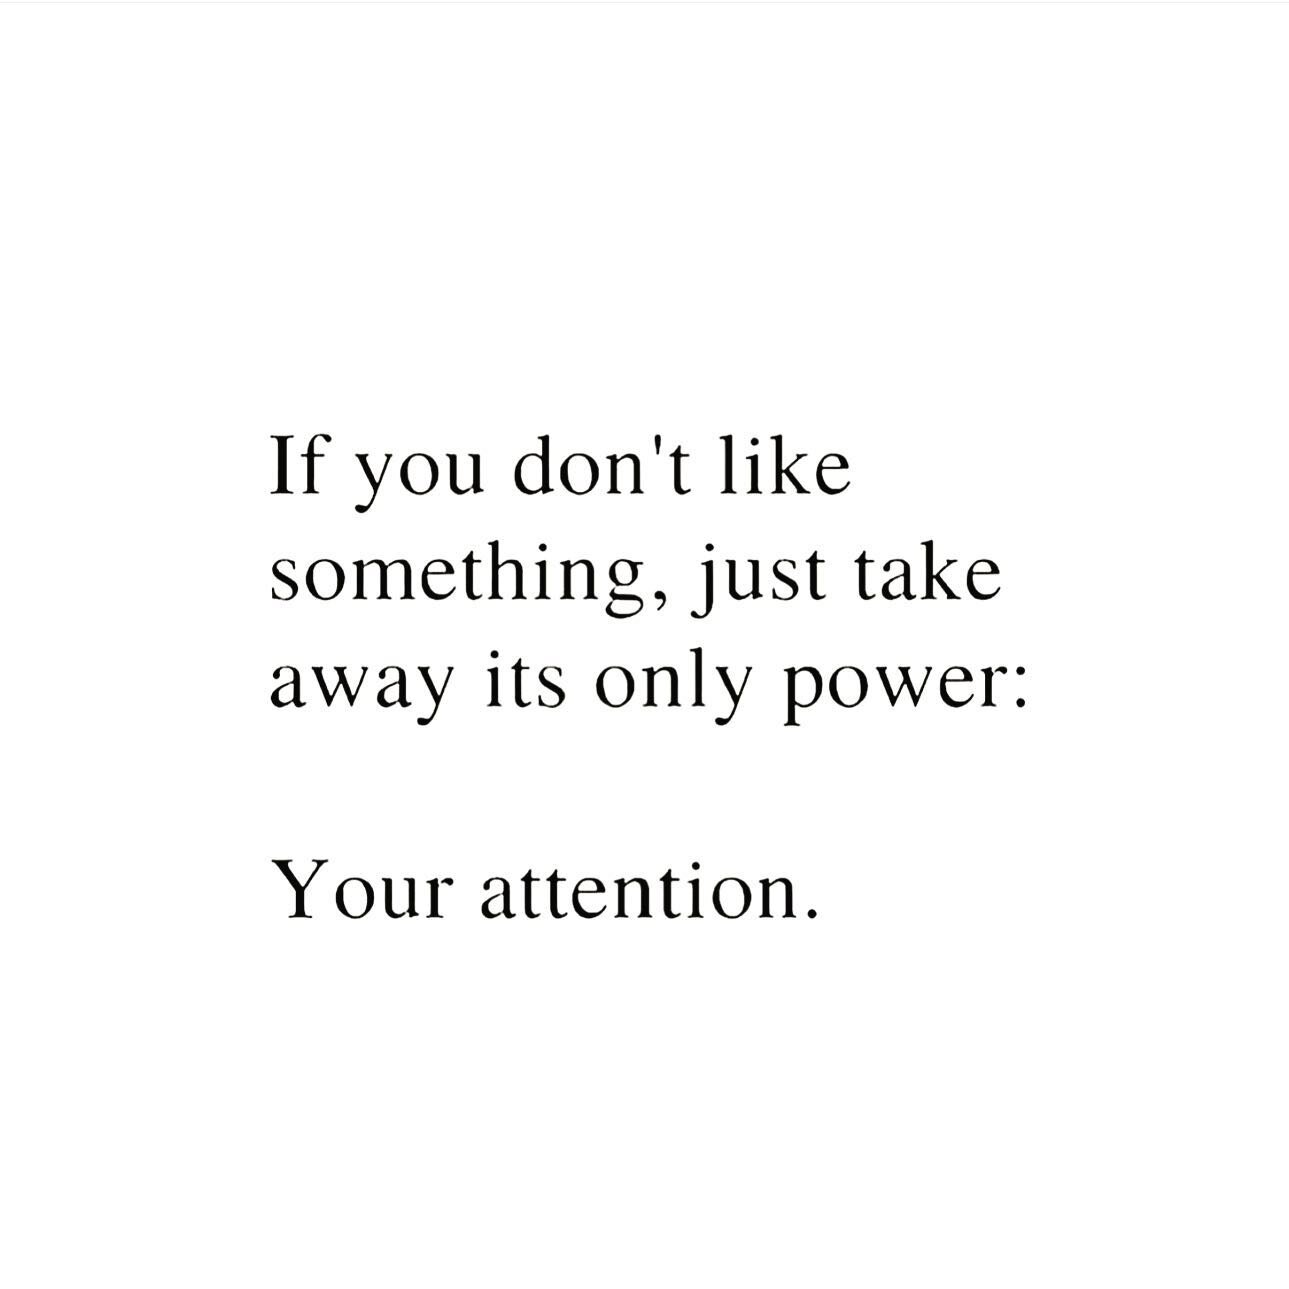 friends, your attention gives power. and too often we give our valuable attention to things that actually should be disempowered in our lives. 
.

i&rsquo;ve been actively eliminating things that steal my attention. i&rsquo;ve been deleting apps. i&r